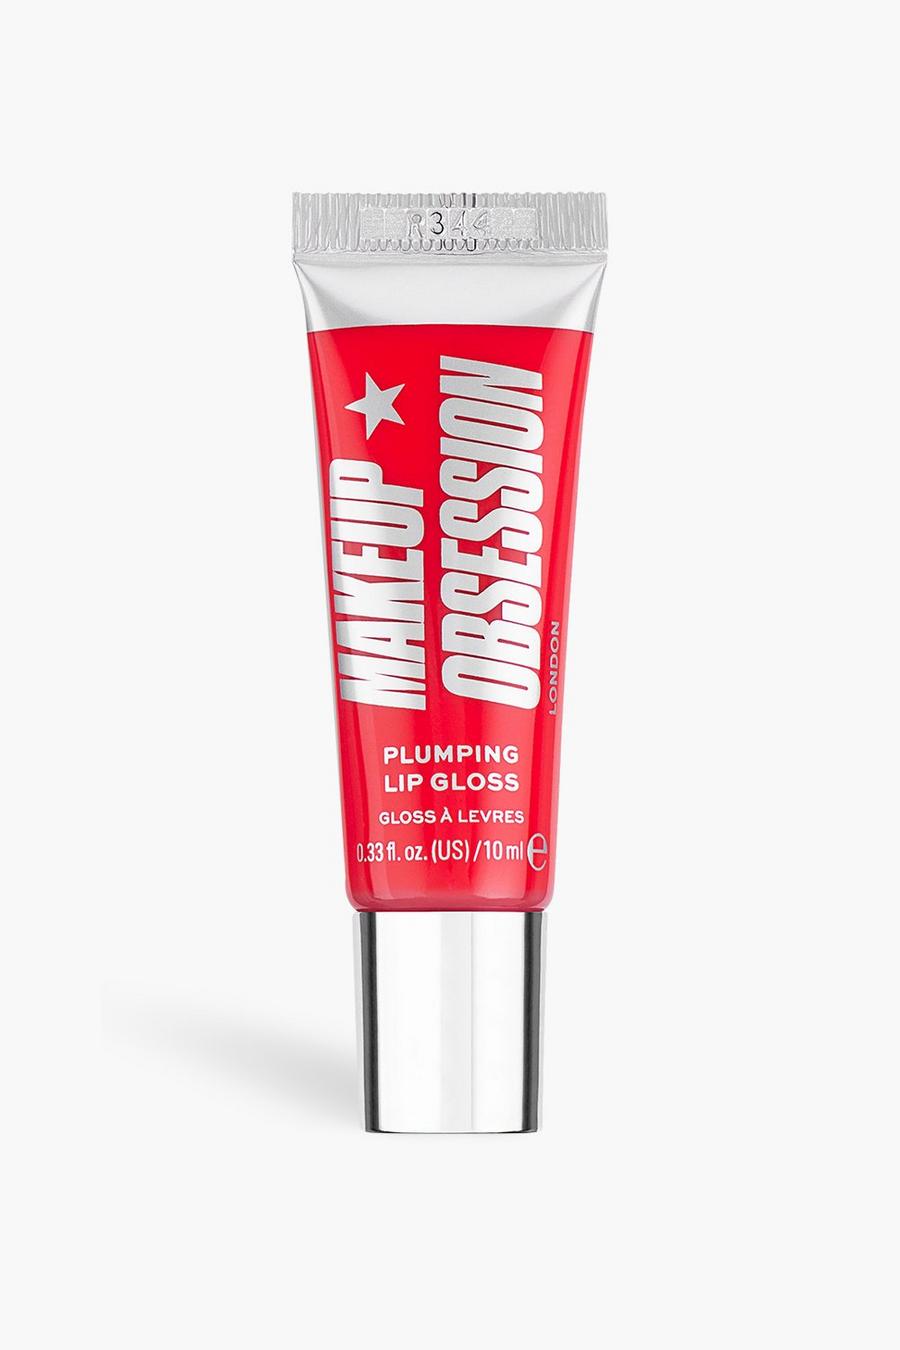 Multi Makeup Obsession Plump Lip Gloss Rate This